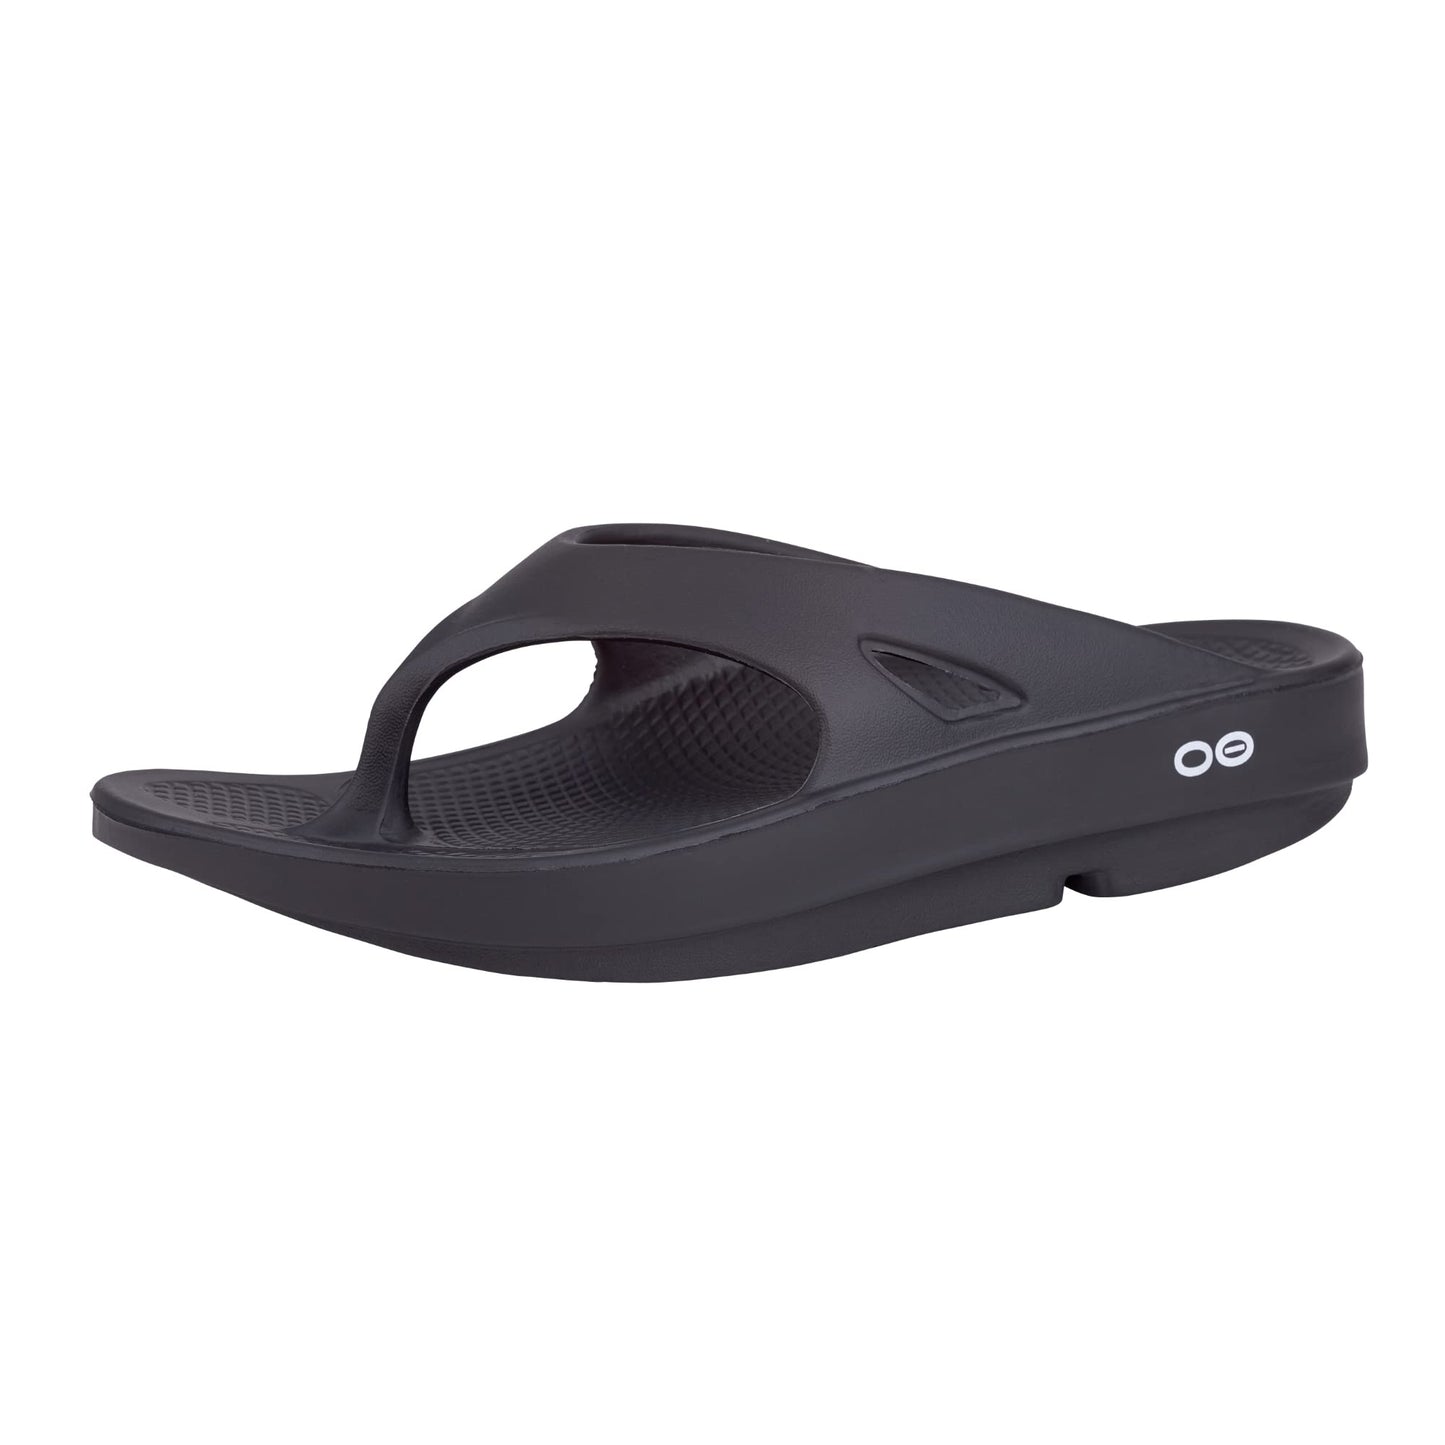 OOFOS OOriginal Sandal, Black - Men’s Size 3, Women’s Size 5 - Lightweight Recovery Footwear - Reduces Stress on Feet, Joints & Back - Machine Washable